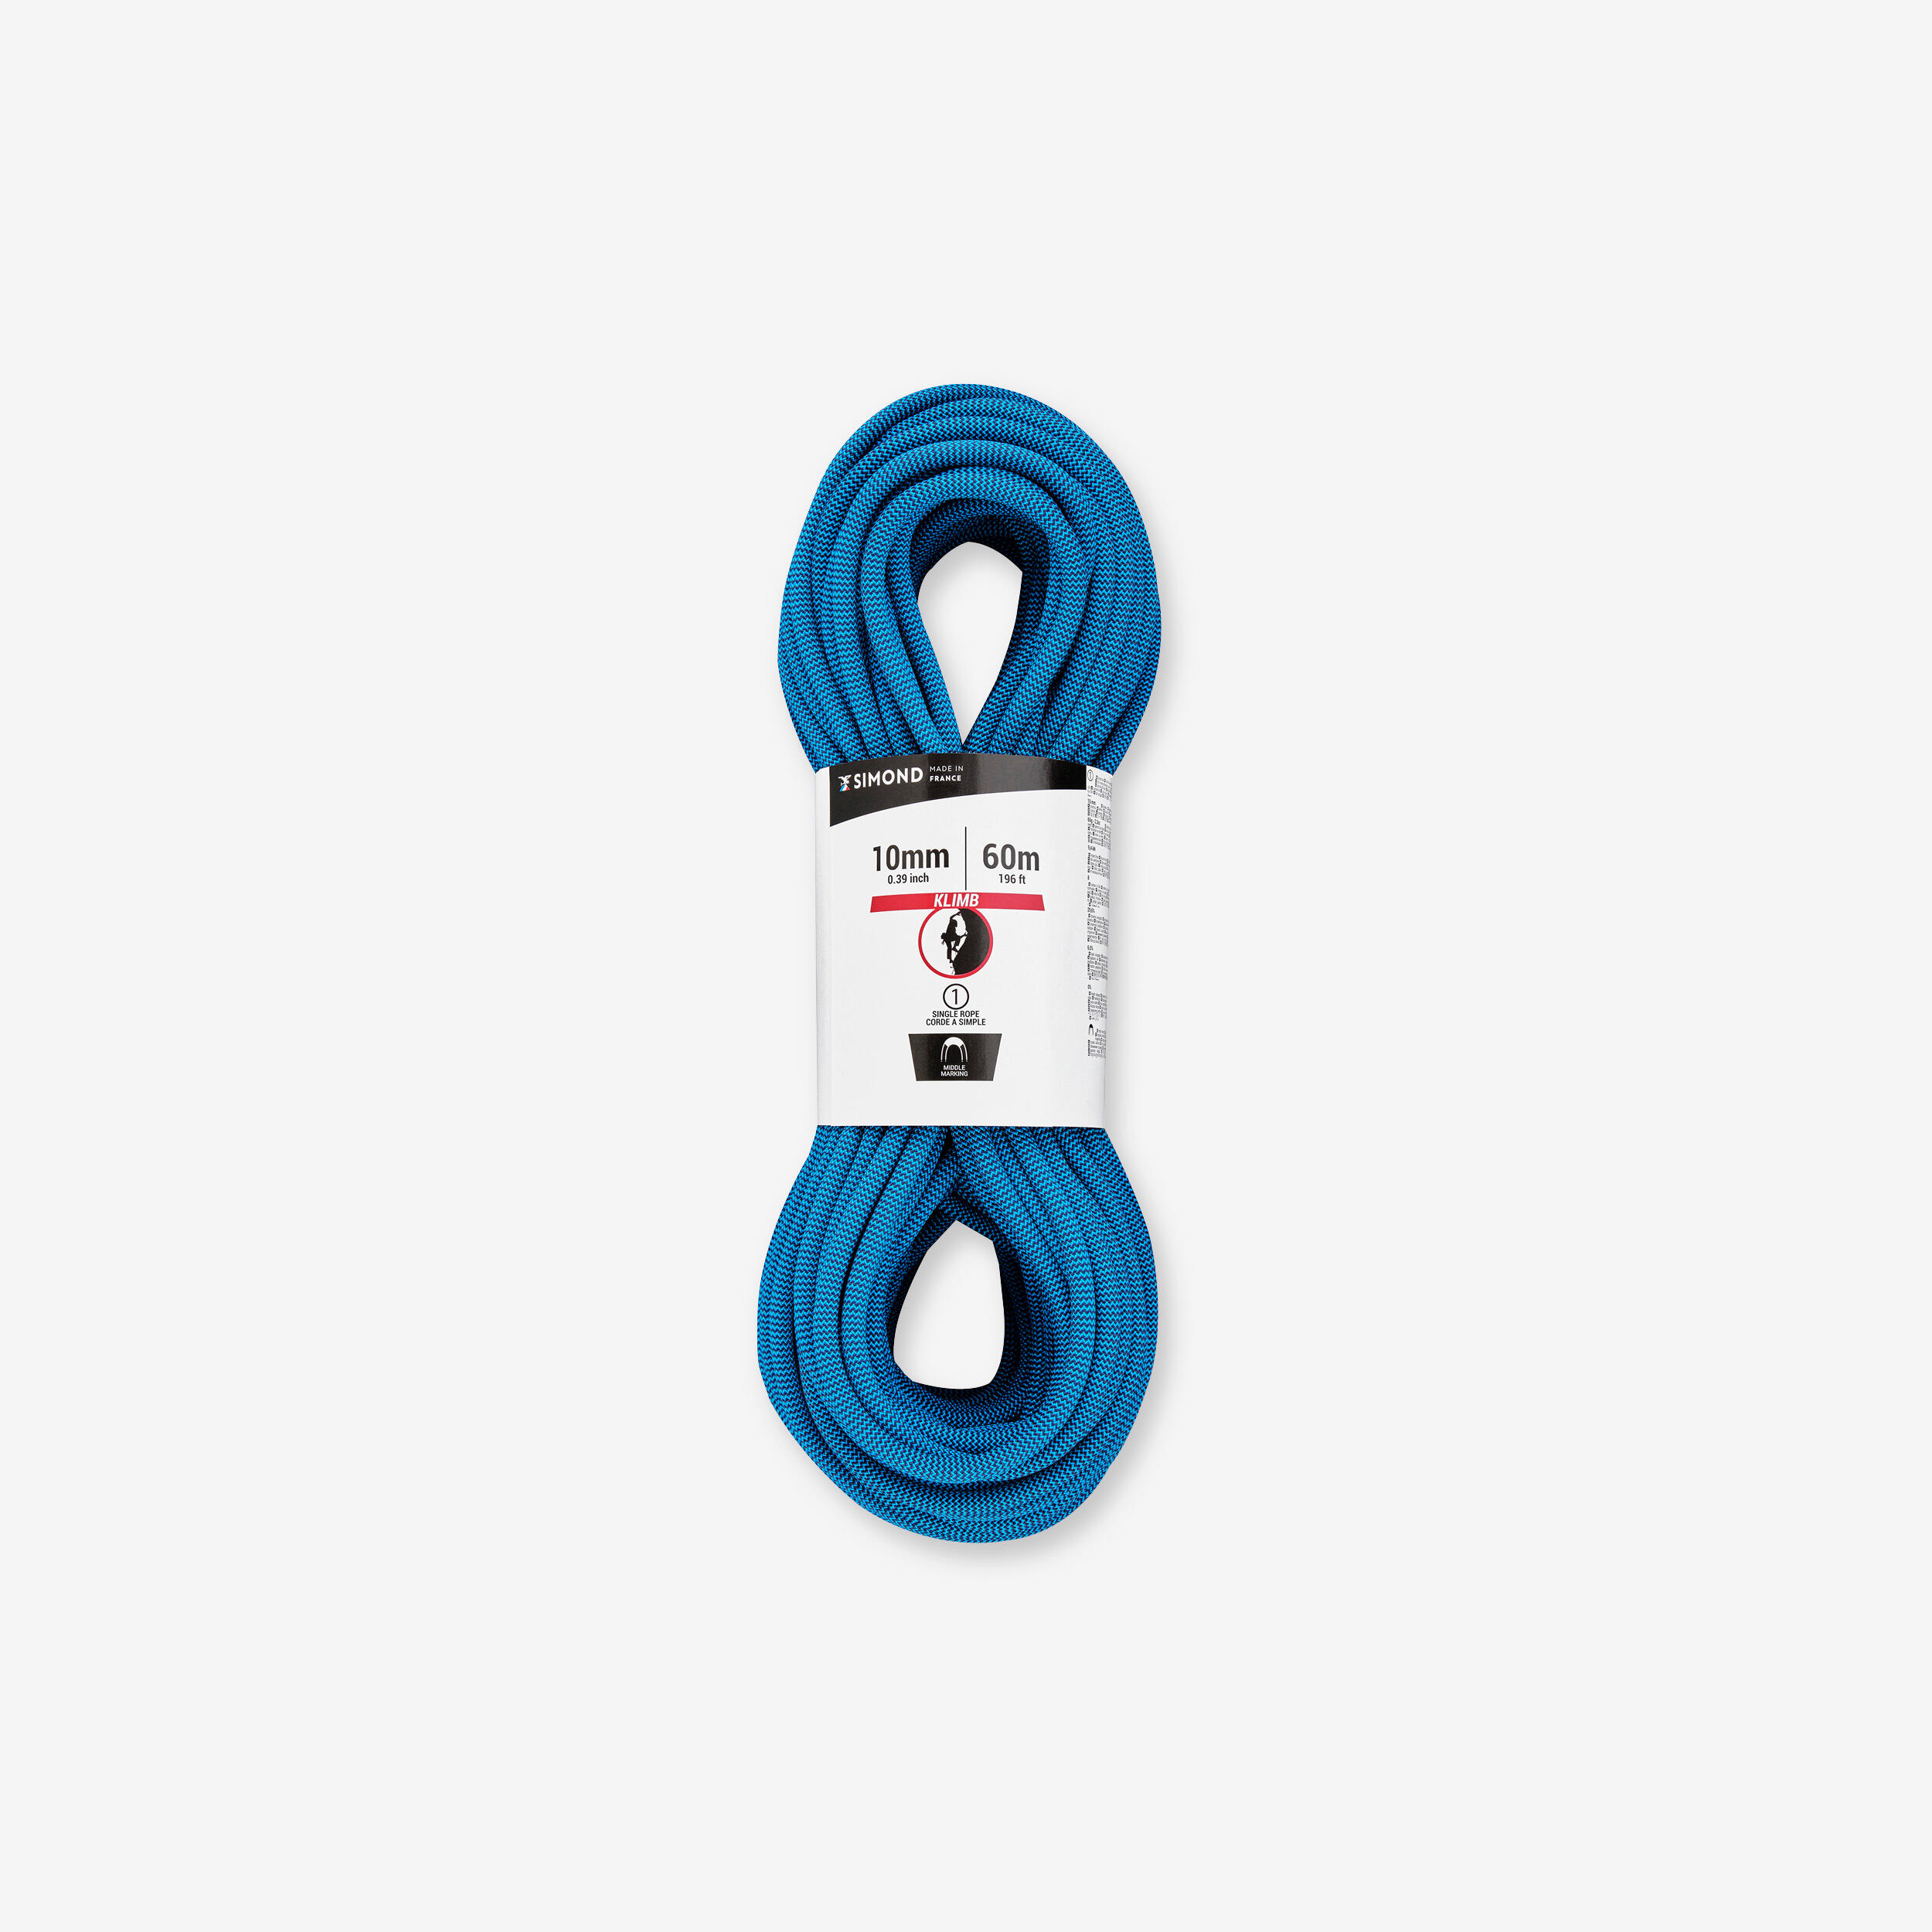 The Definitive Guide to Buying Your First Climbing Rope - Hatt